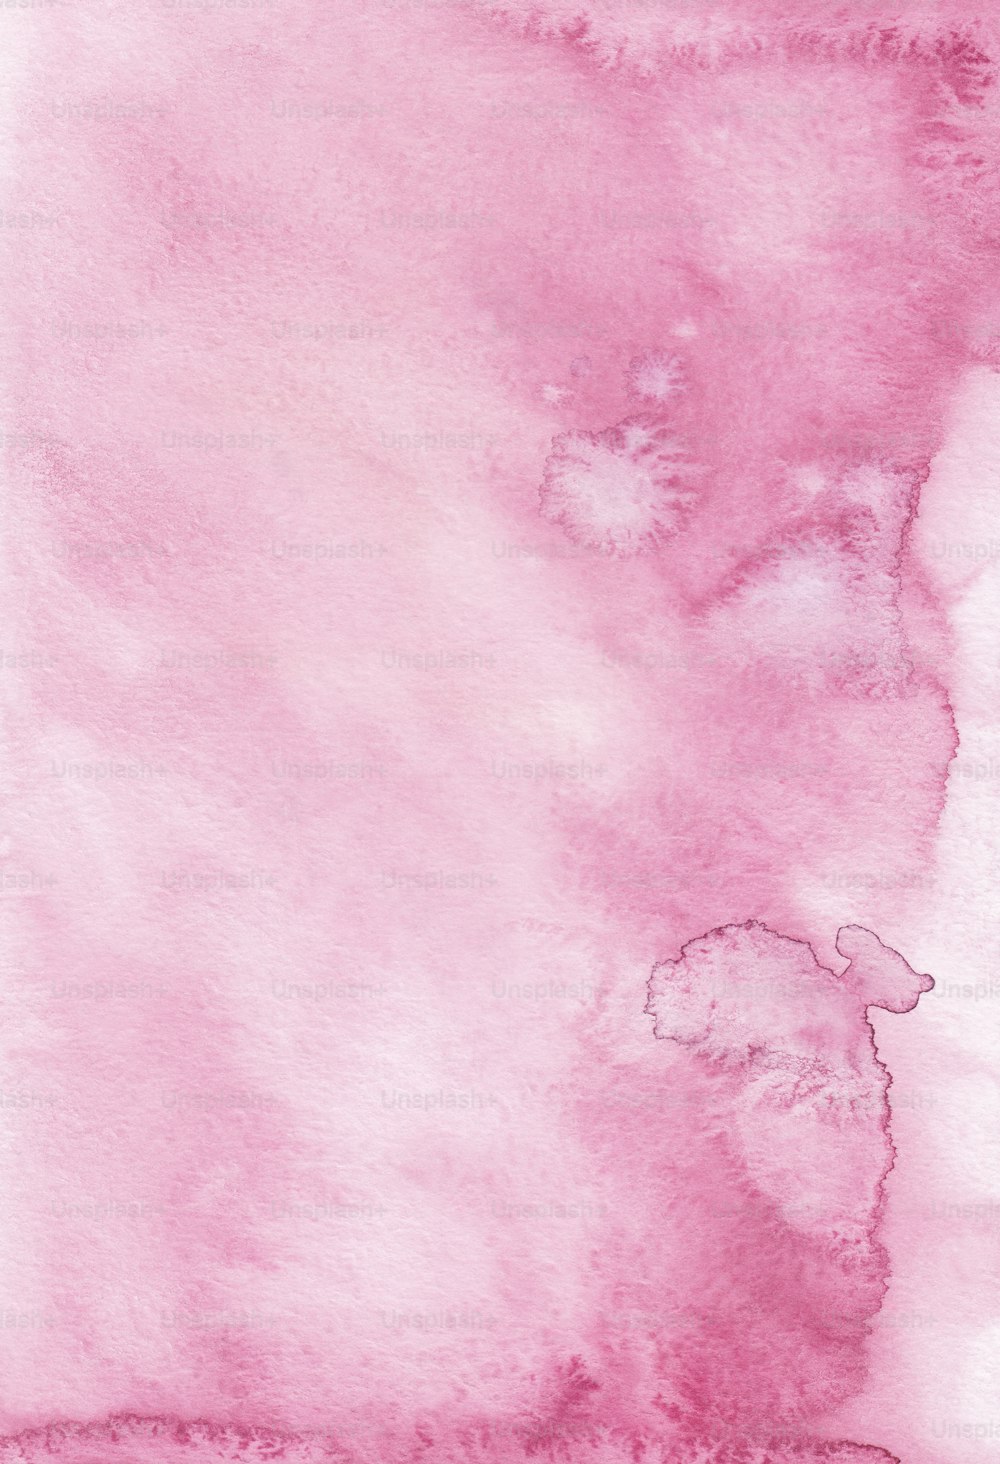 a watercolor painting of a pink and white background